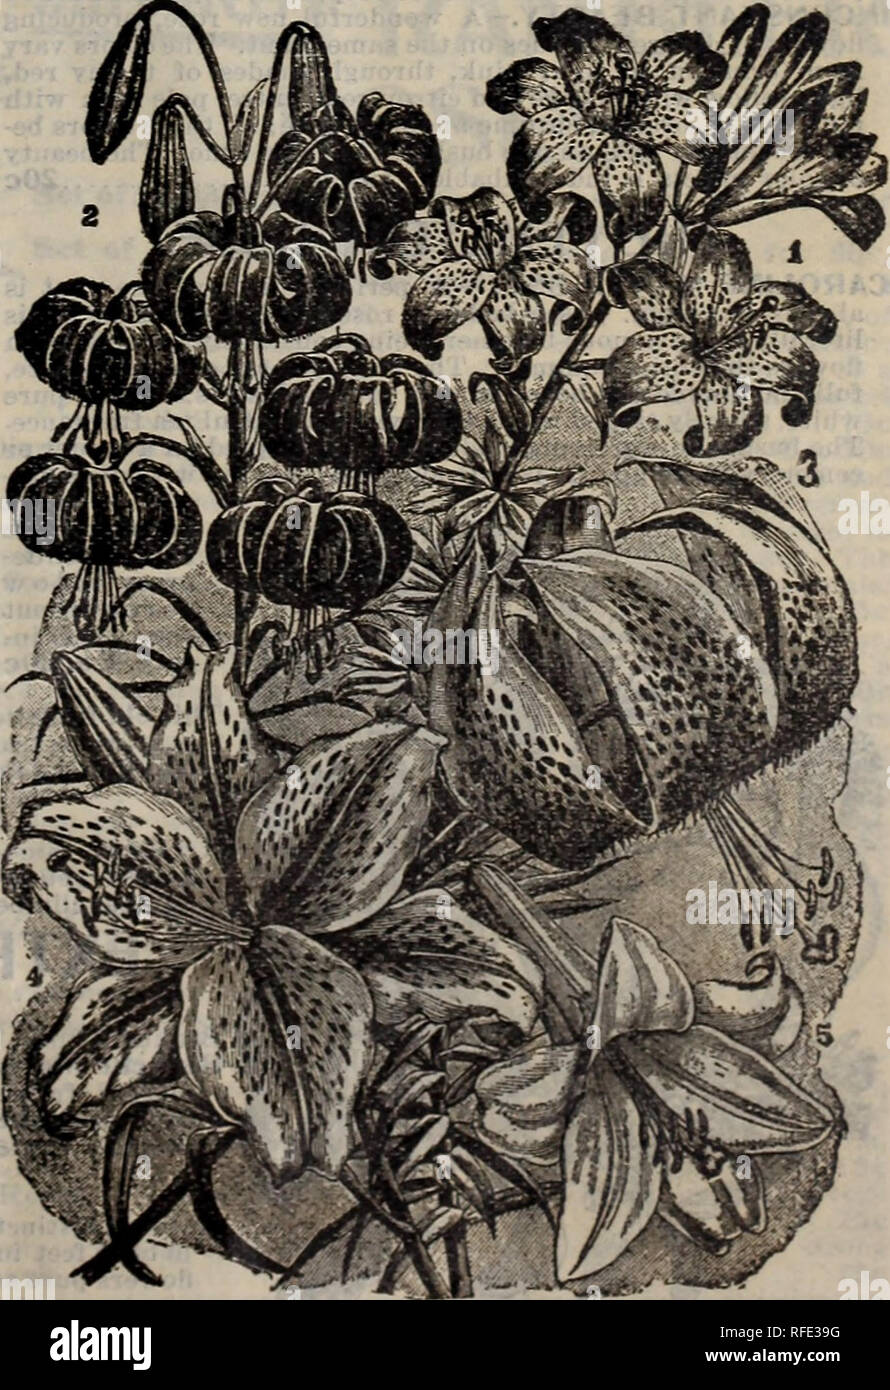 . Rennie's 1902. Nursery stock Ontario Catalogs; Seeds Catalogs; Vegetables Seeds Catalogs; Flowers Seeds Catalogs; Gardening Equipment and supplies Catalogs; Bulbs (Plants) Catalogs; Bee culture Equipment and supplies Catalogs. Otahlete Orange. New Weeping Lantana. MUSA ENSETE. Abyssinian Banana Plant.—Magnificent leaves, long broad and massive, of a beautiful green, vrith a broad crimson mid-rib; grows luxuriantly from eight to ten feet high, can be stored in a light cellar or cool greenhouse during the winter, with a covering of soil, or planted in a tub, water sparingly. Fine plants, each  Stock Photo